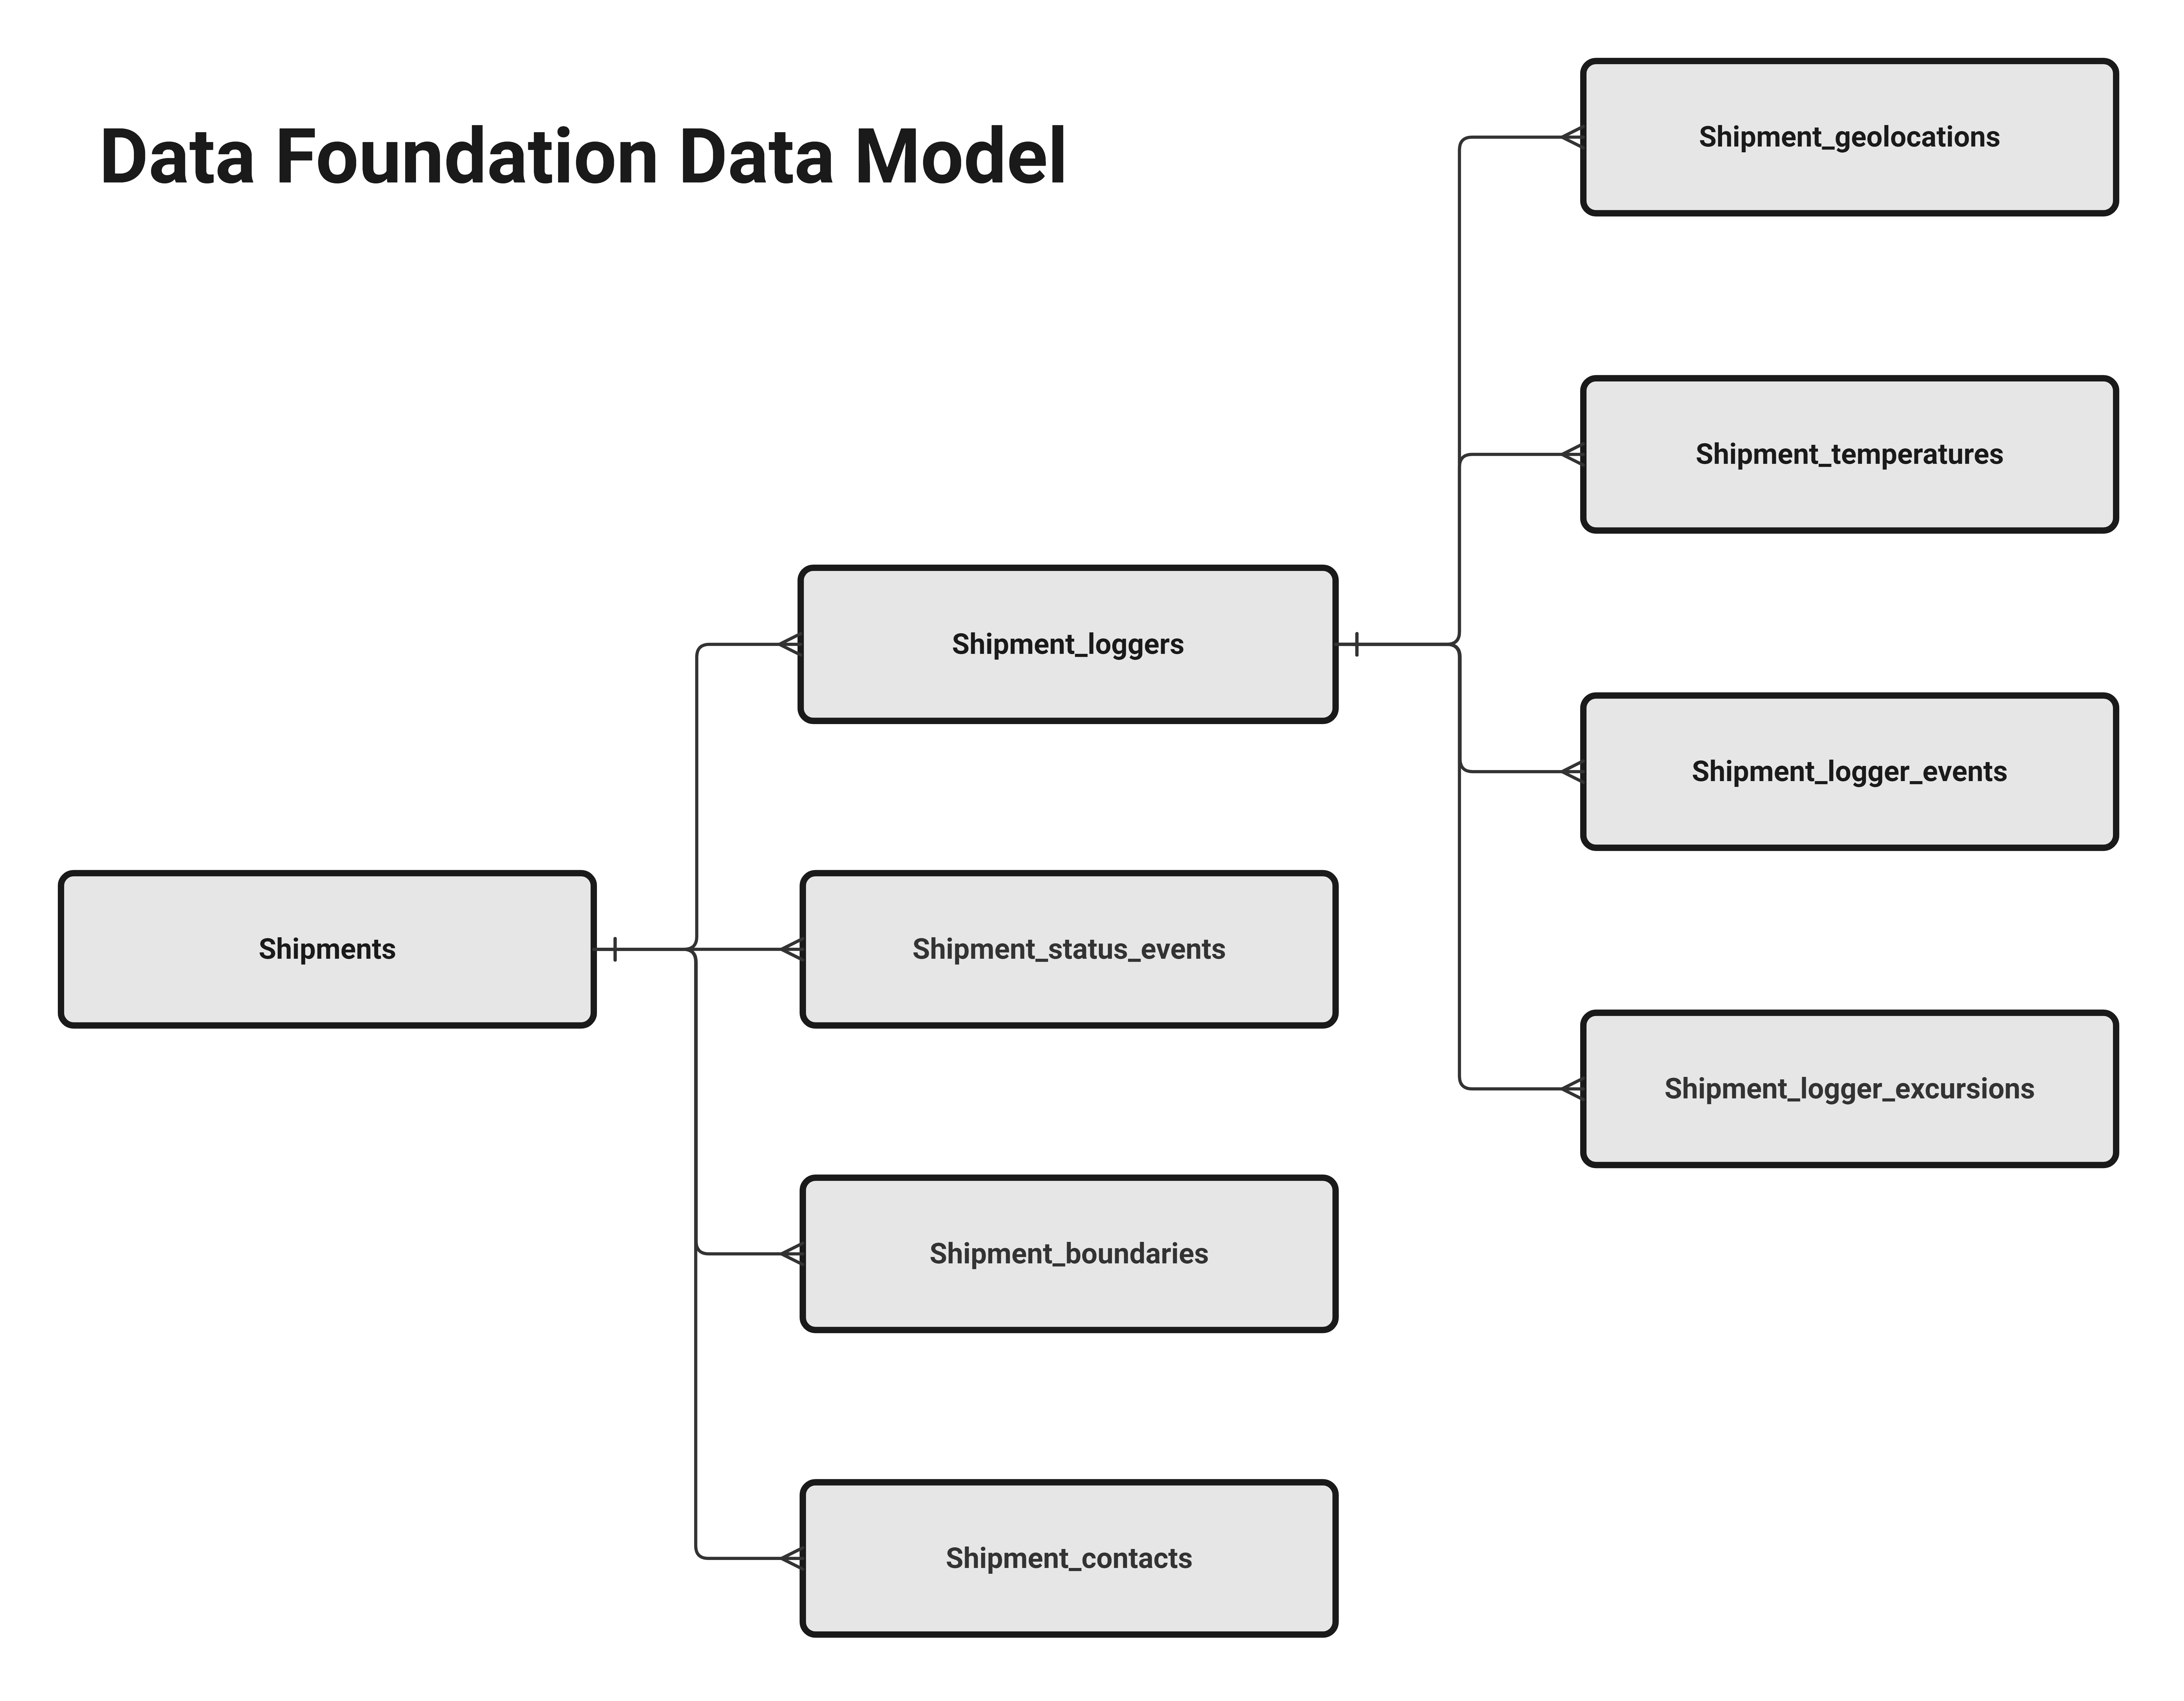 Data Foundation data model overview image, showing the tables in the domain and how the tables are linked